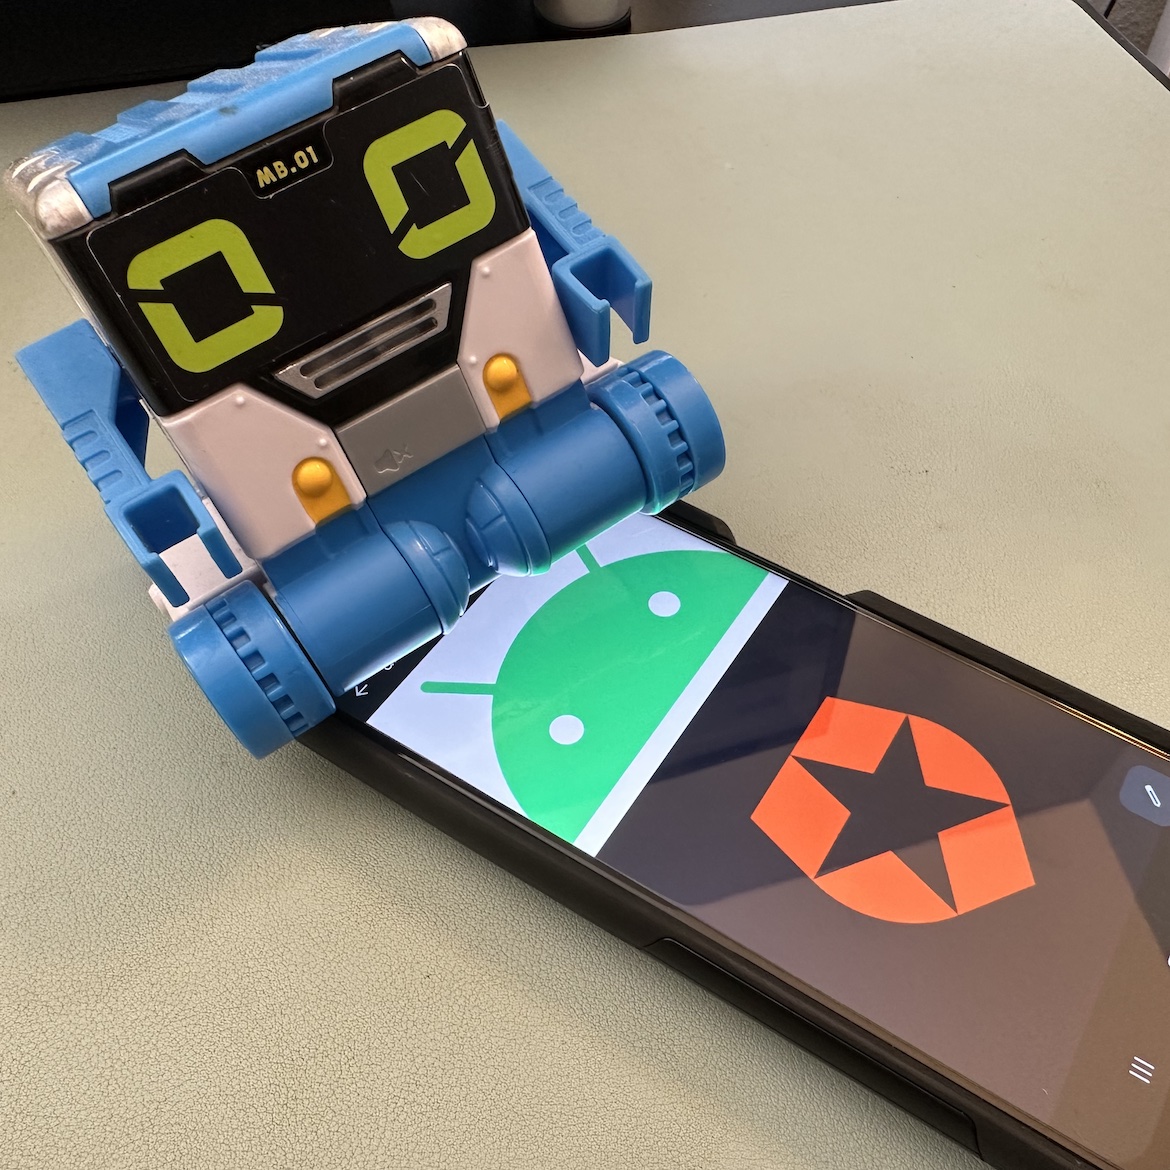 The curious Robo5 for Android (pictures) - CNET